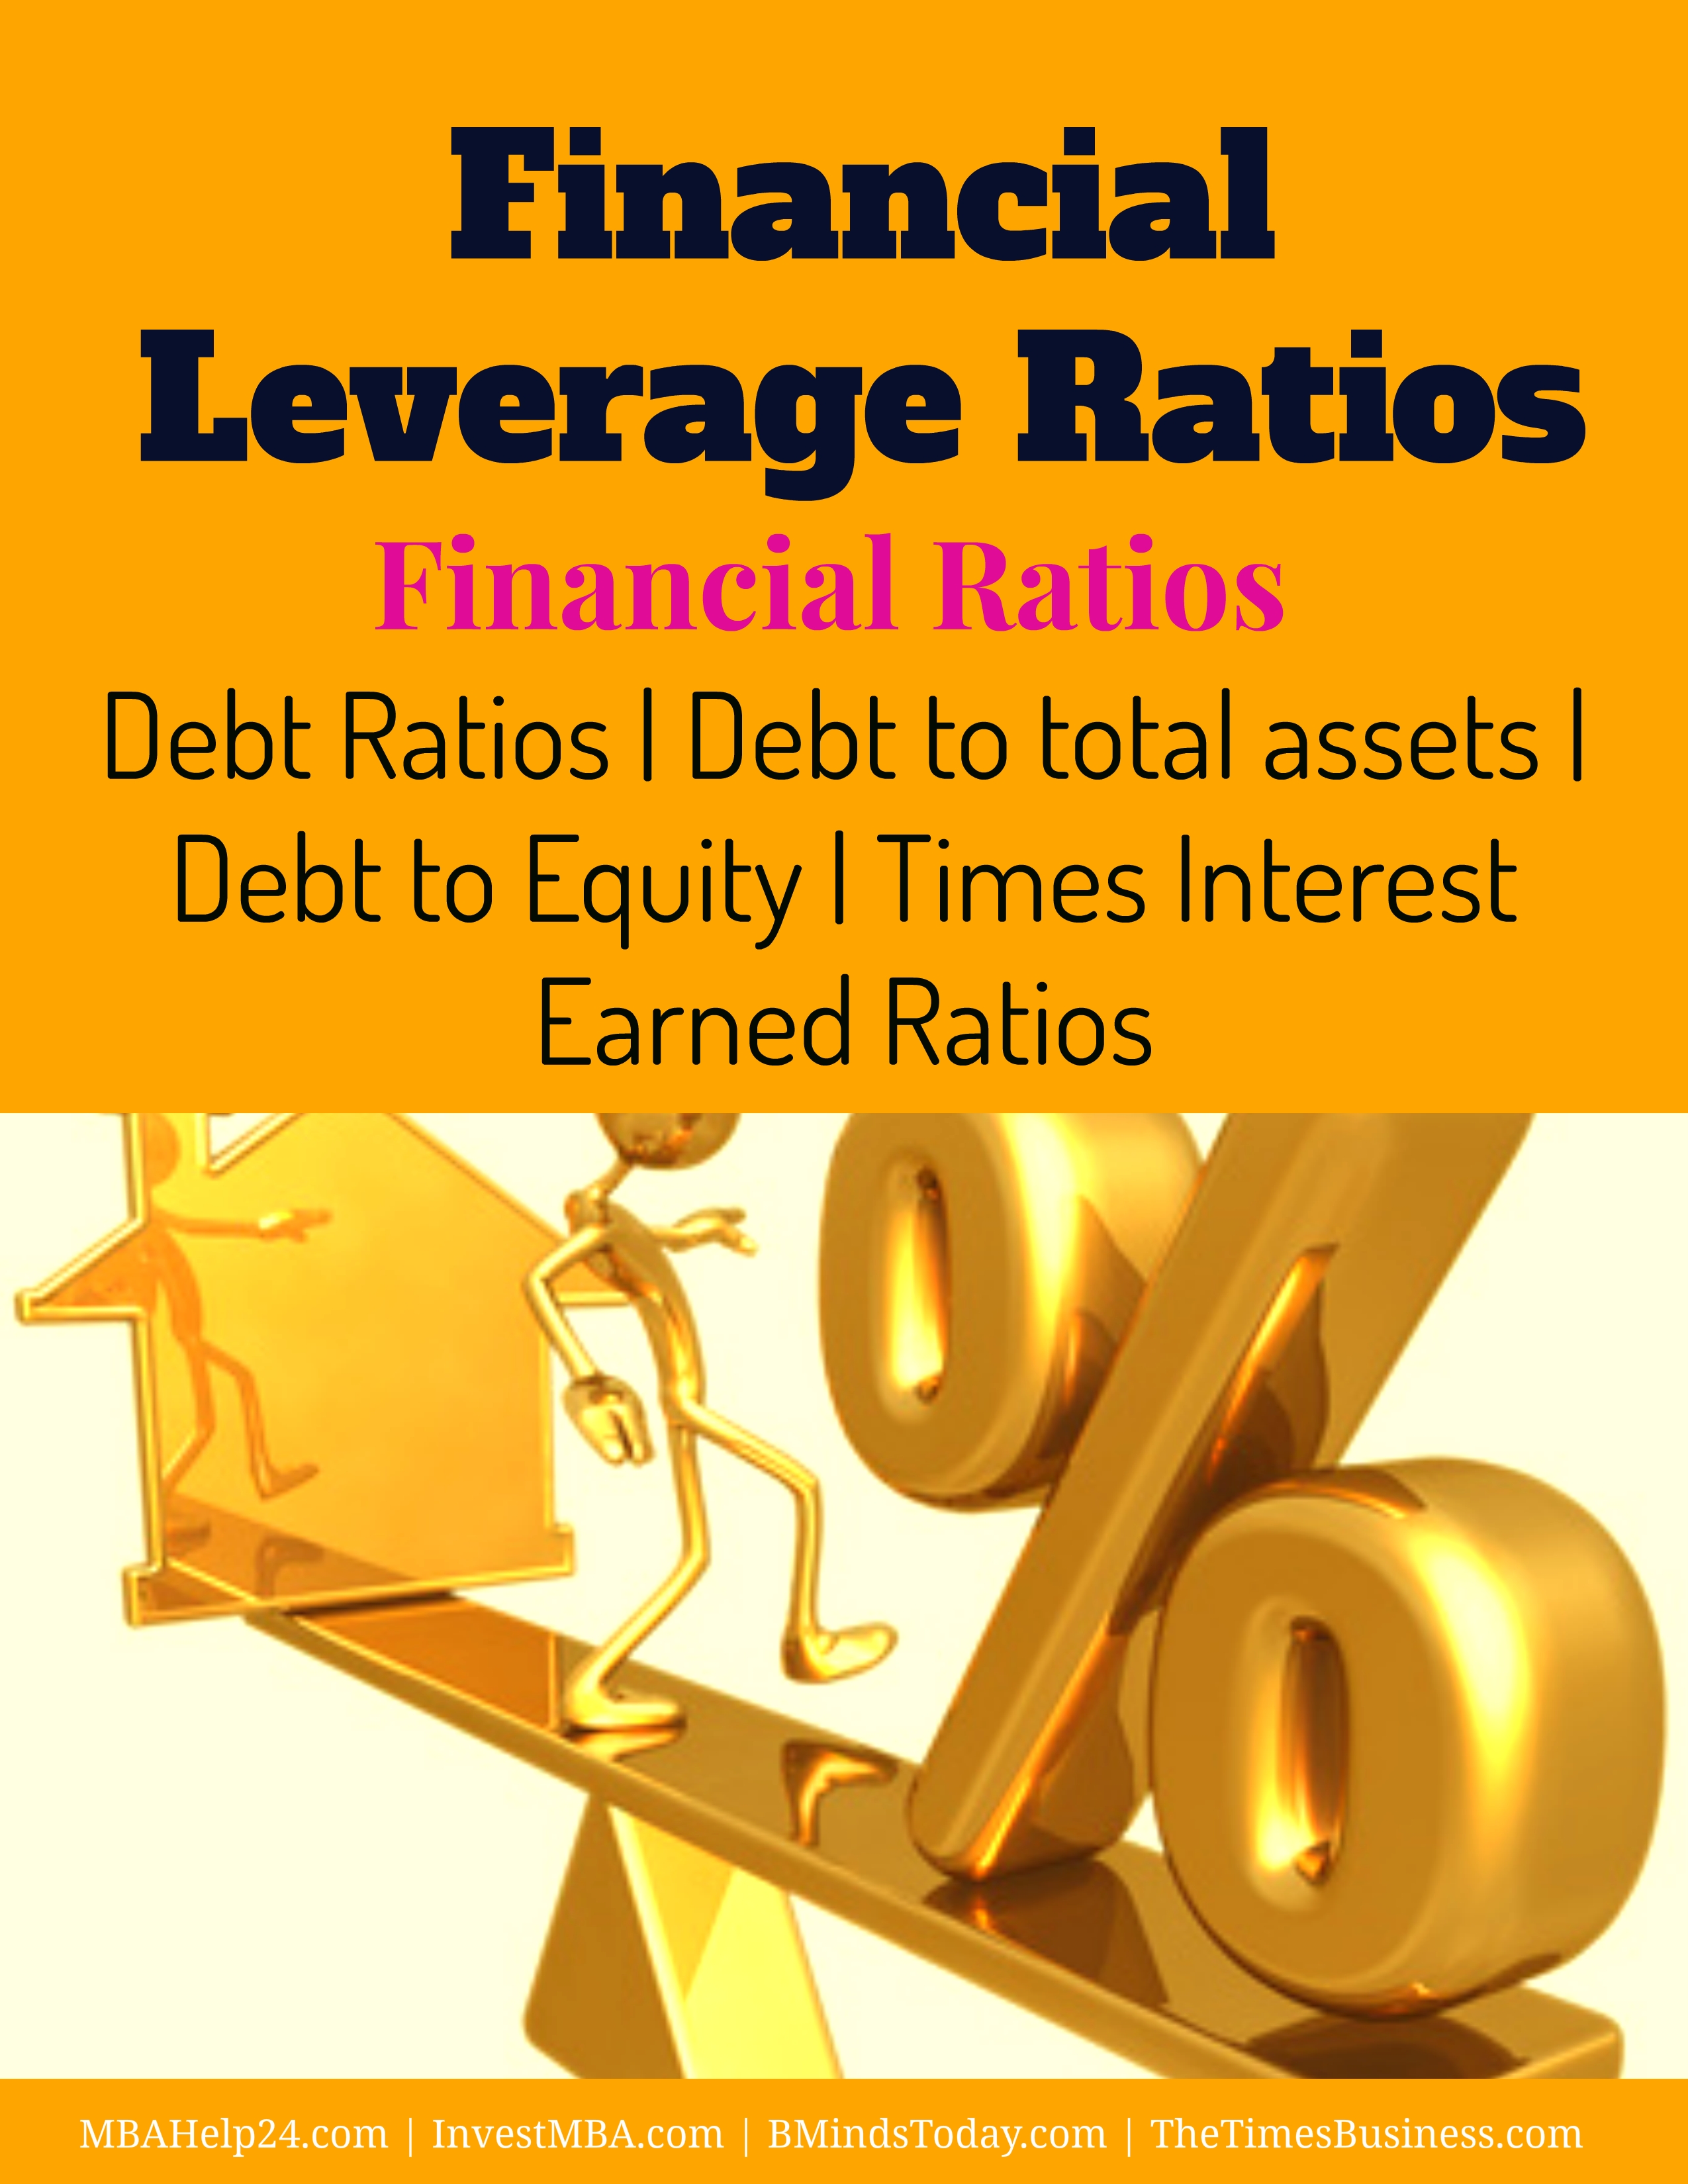 Financial Leverage Ratios- Debt ratio,Total Assets, Equity ratio, Times Interest Earned ratio Debt Financial Leverage Ratios | Debt | Total Assets | Equity | Times Interest Earned Financial Leverage Ratios Debt ratioTotal Assets Equity ratio Times Interest Earned ratio Financial Leverage Ratios | Debt | Total Assets | Equity Financial Leverage Ratios | Debt | Total Assets | Equity Financial Leverage Ratios Debt ratioTotal Assets Equity ratio Times Interest Earned ratio